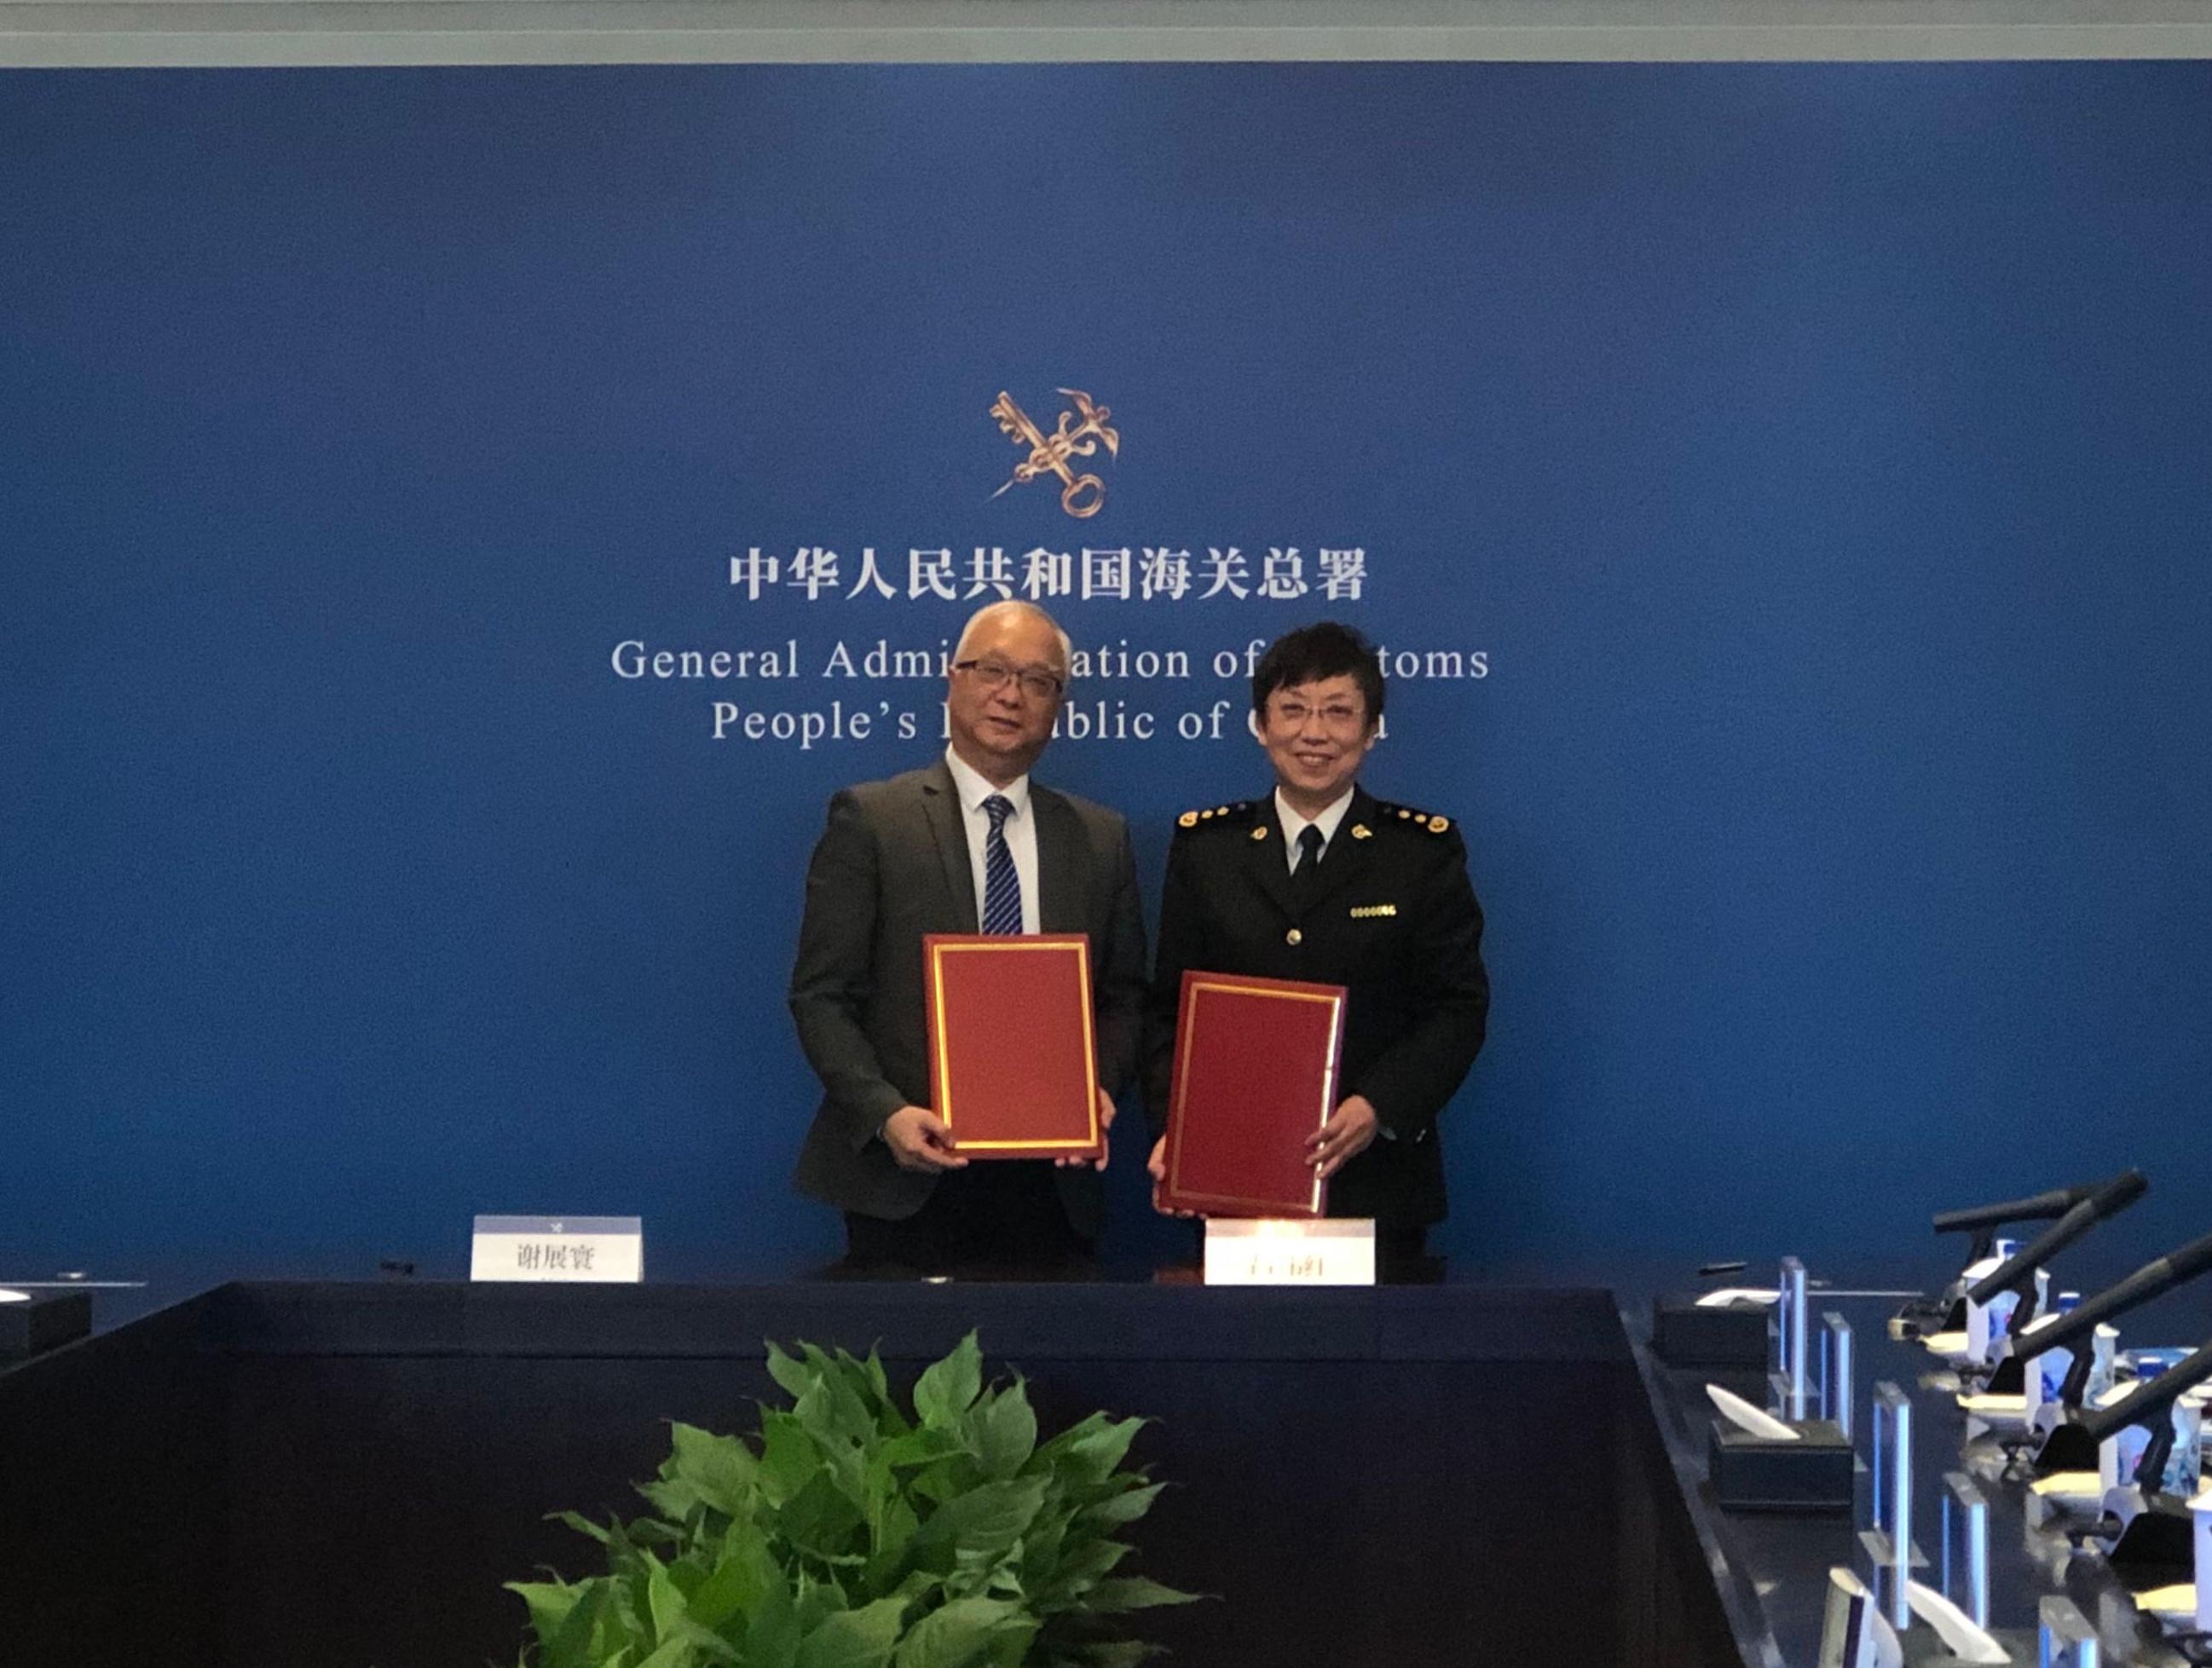 The Secretary for Environment and Ecology, Mr Tse Chin-wan (left), today (April 17) visits the General Administration of Customs of the People's Republic of China (GACC). Photo shows Mr Tse and Vice Minister of the GACC Ms Lv Weihong (right), signed the Co-operation Arrangement for Regulation of Safety of Raw Milk.